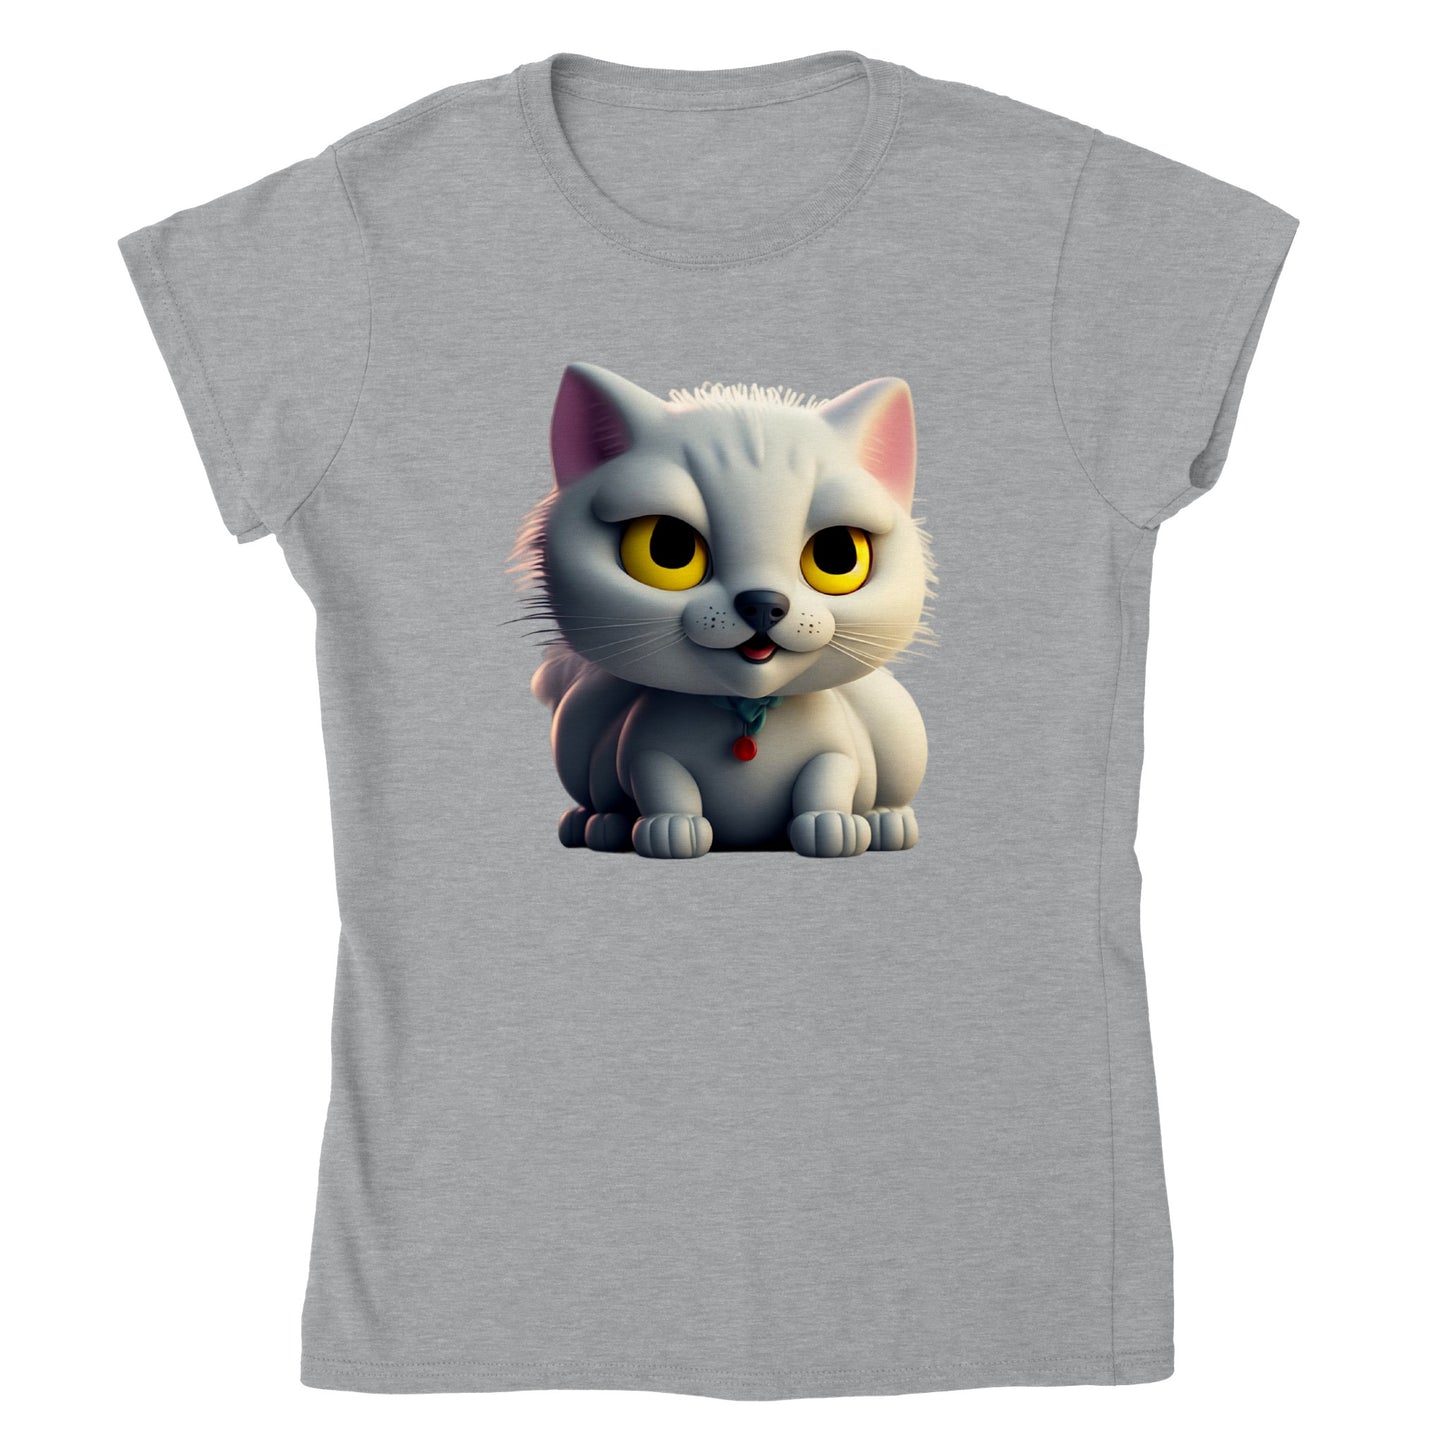 Adorable, Cool, Cute Cats and Kittens Toy - Classic Women’s Crewneck T-Shirt 52